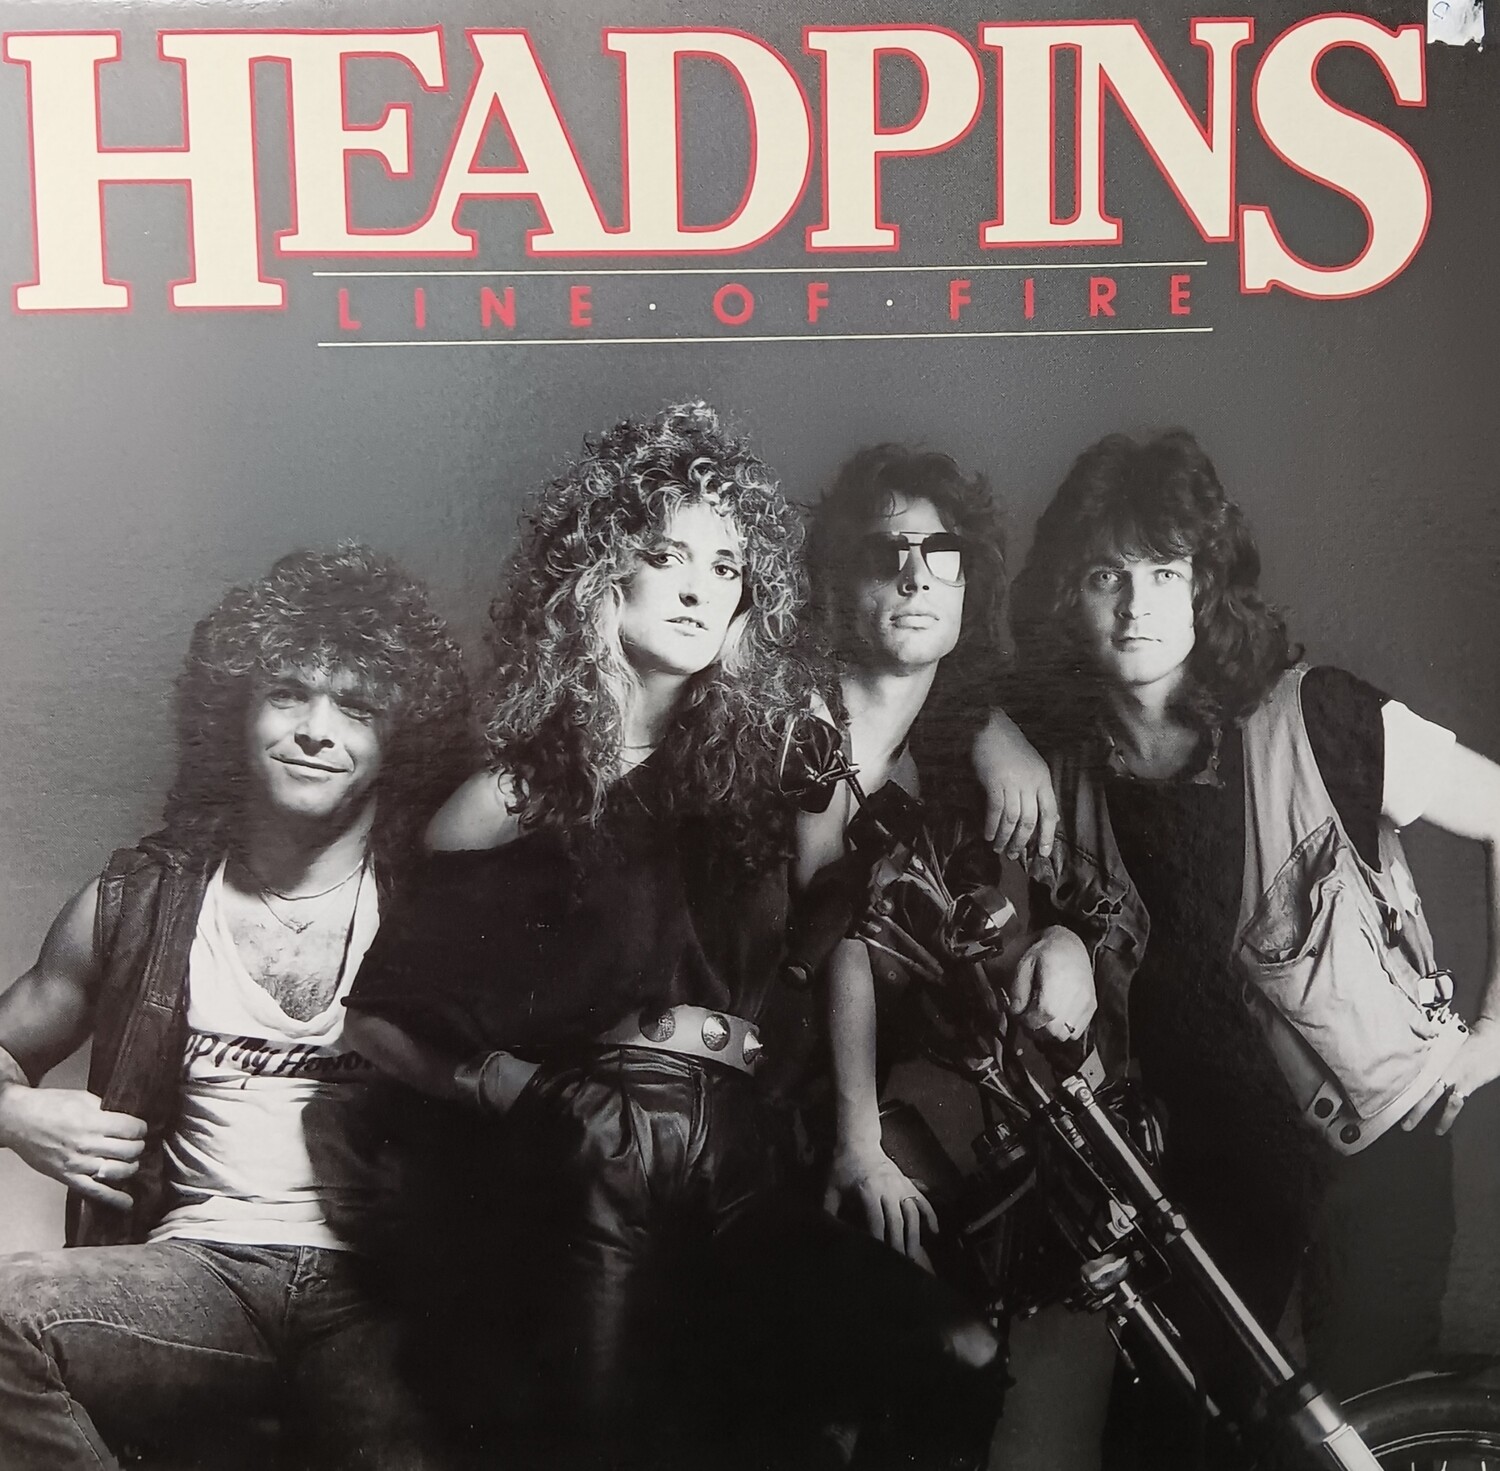 HEADPINS - Line of fire